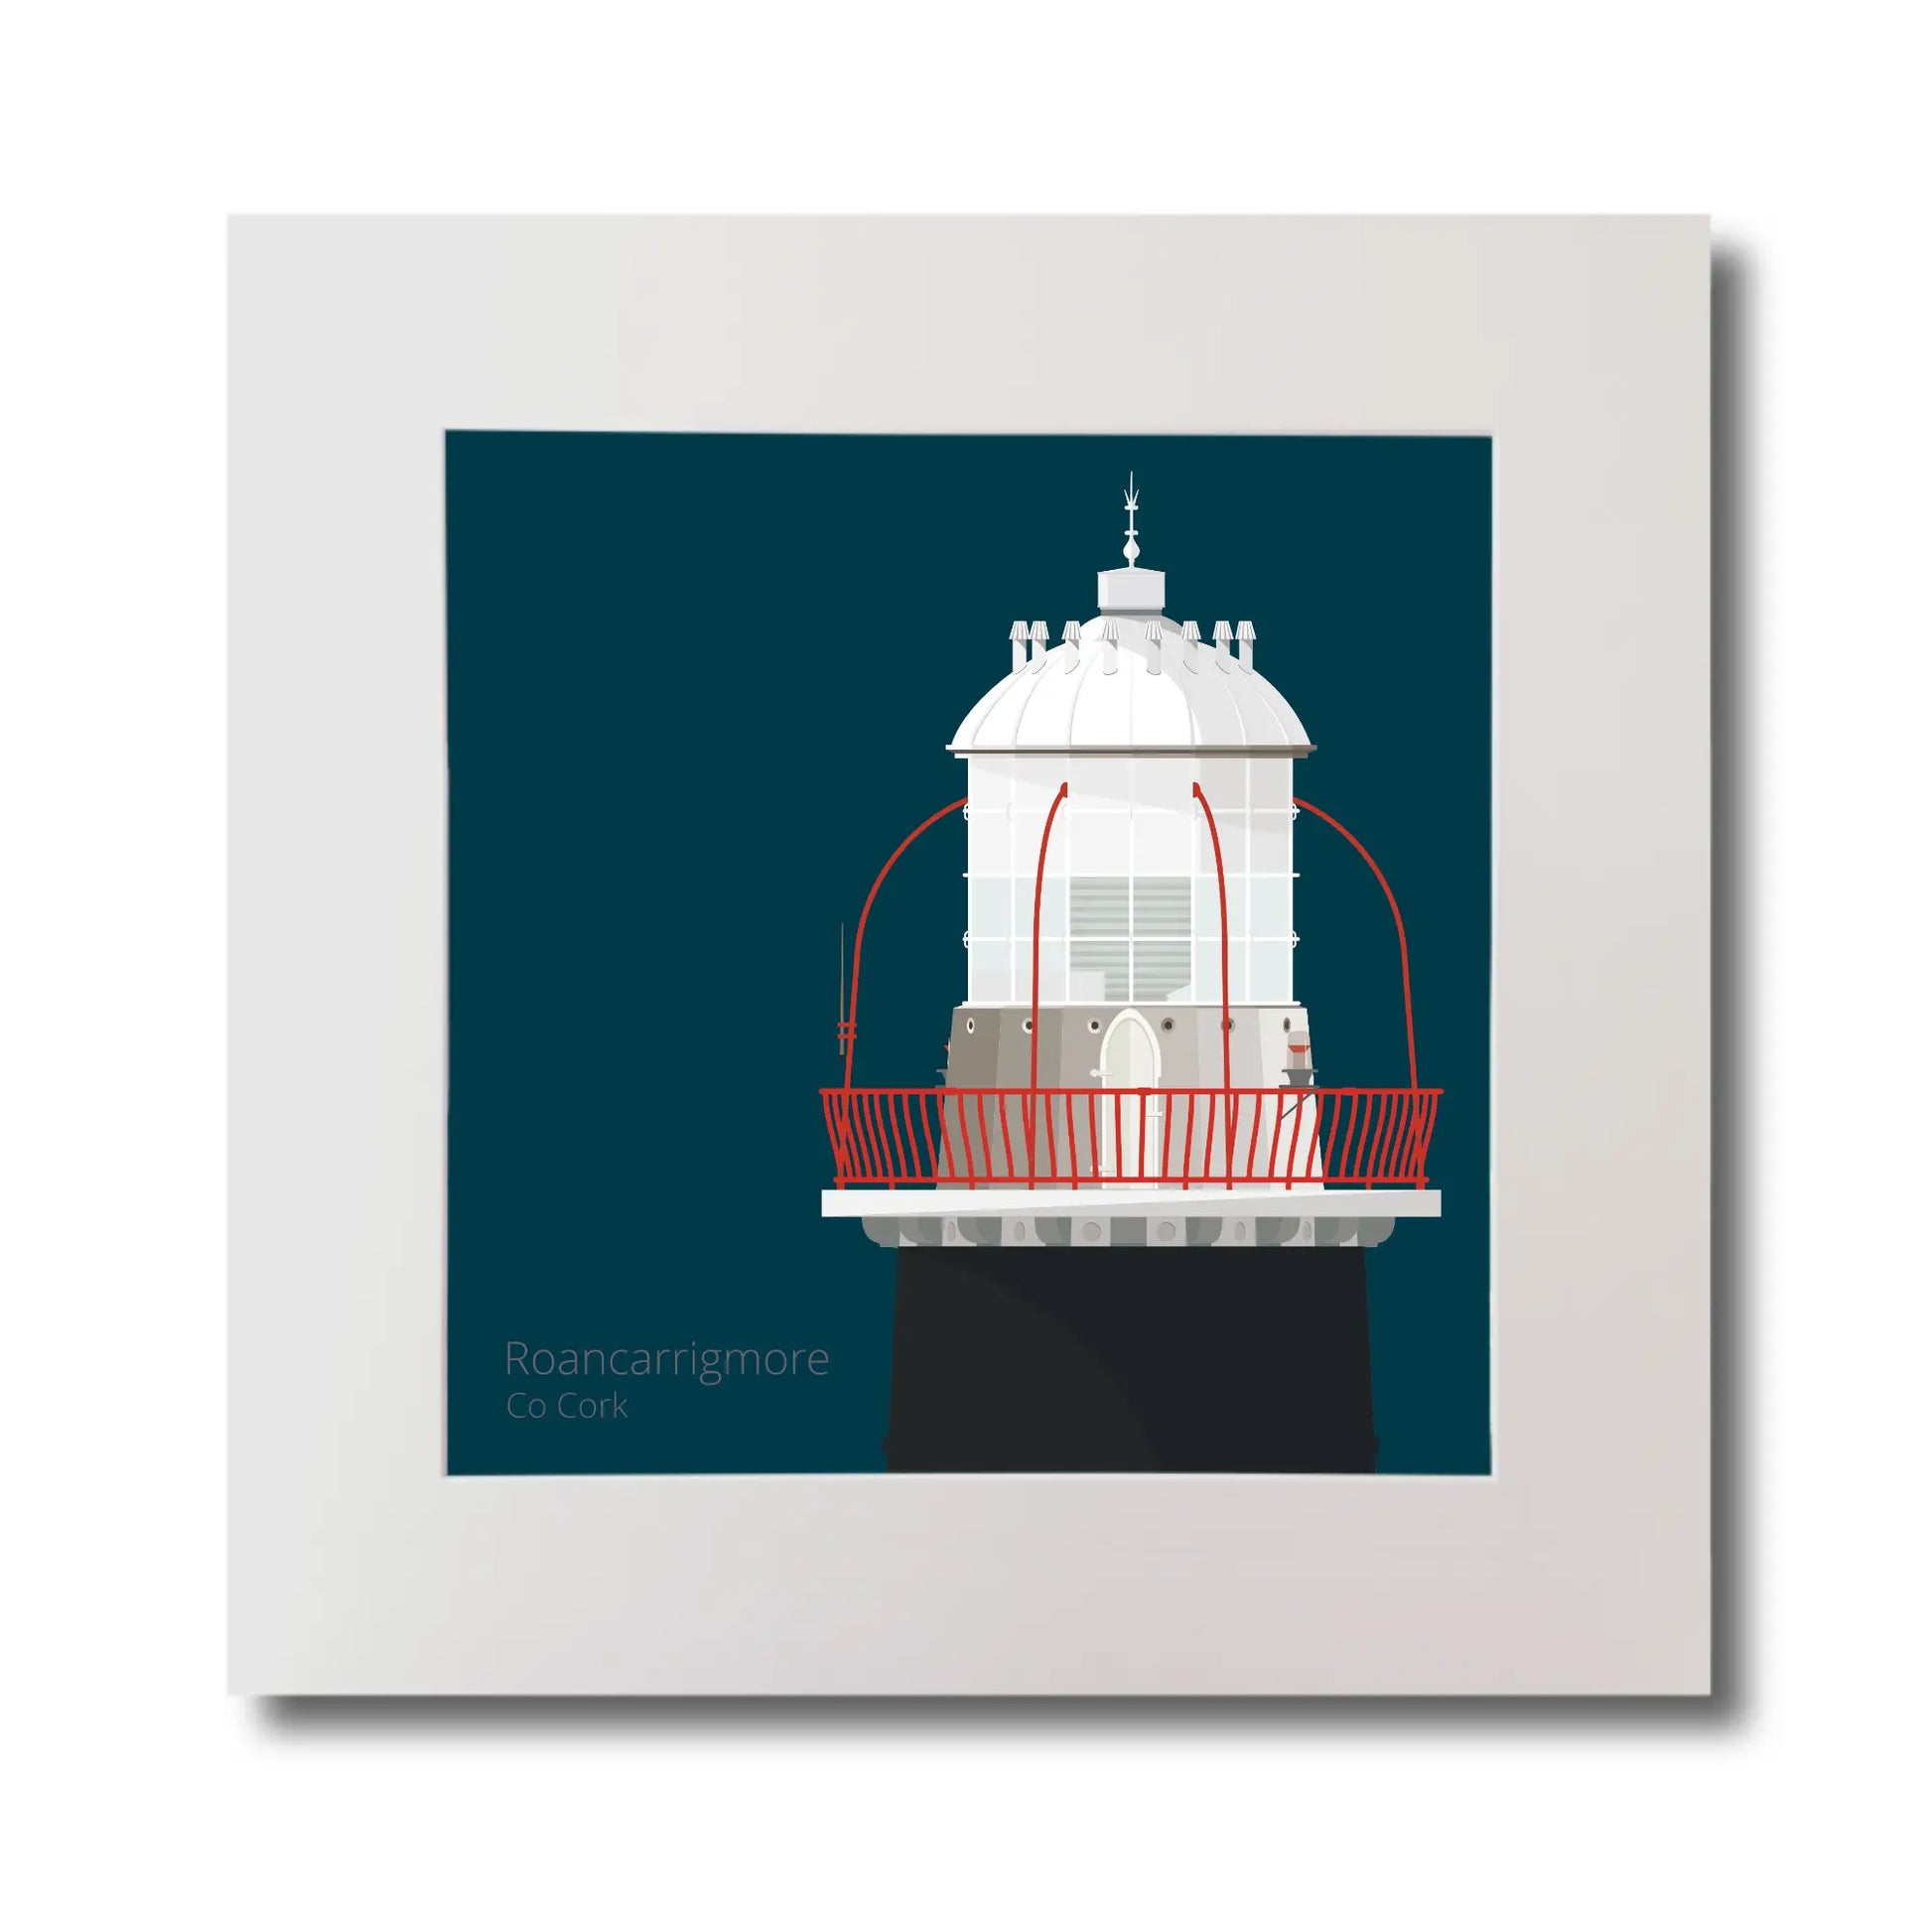 Illustration of Roancarrigmore lighthouse on a midnight blue background, mounted and measuring 30x30cm.